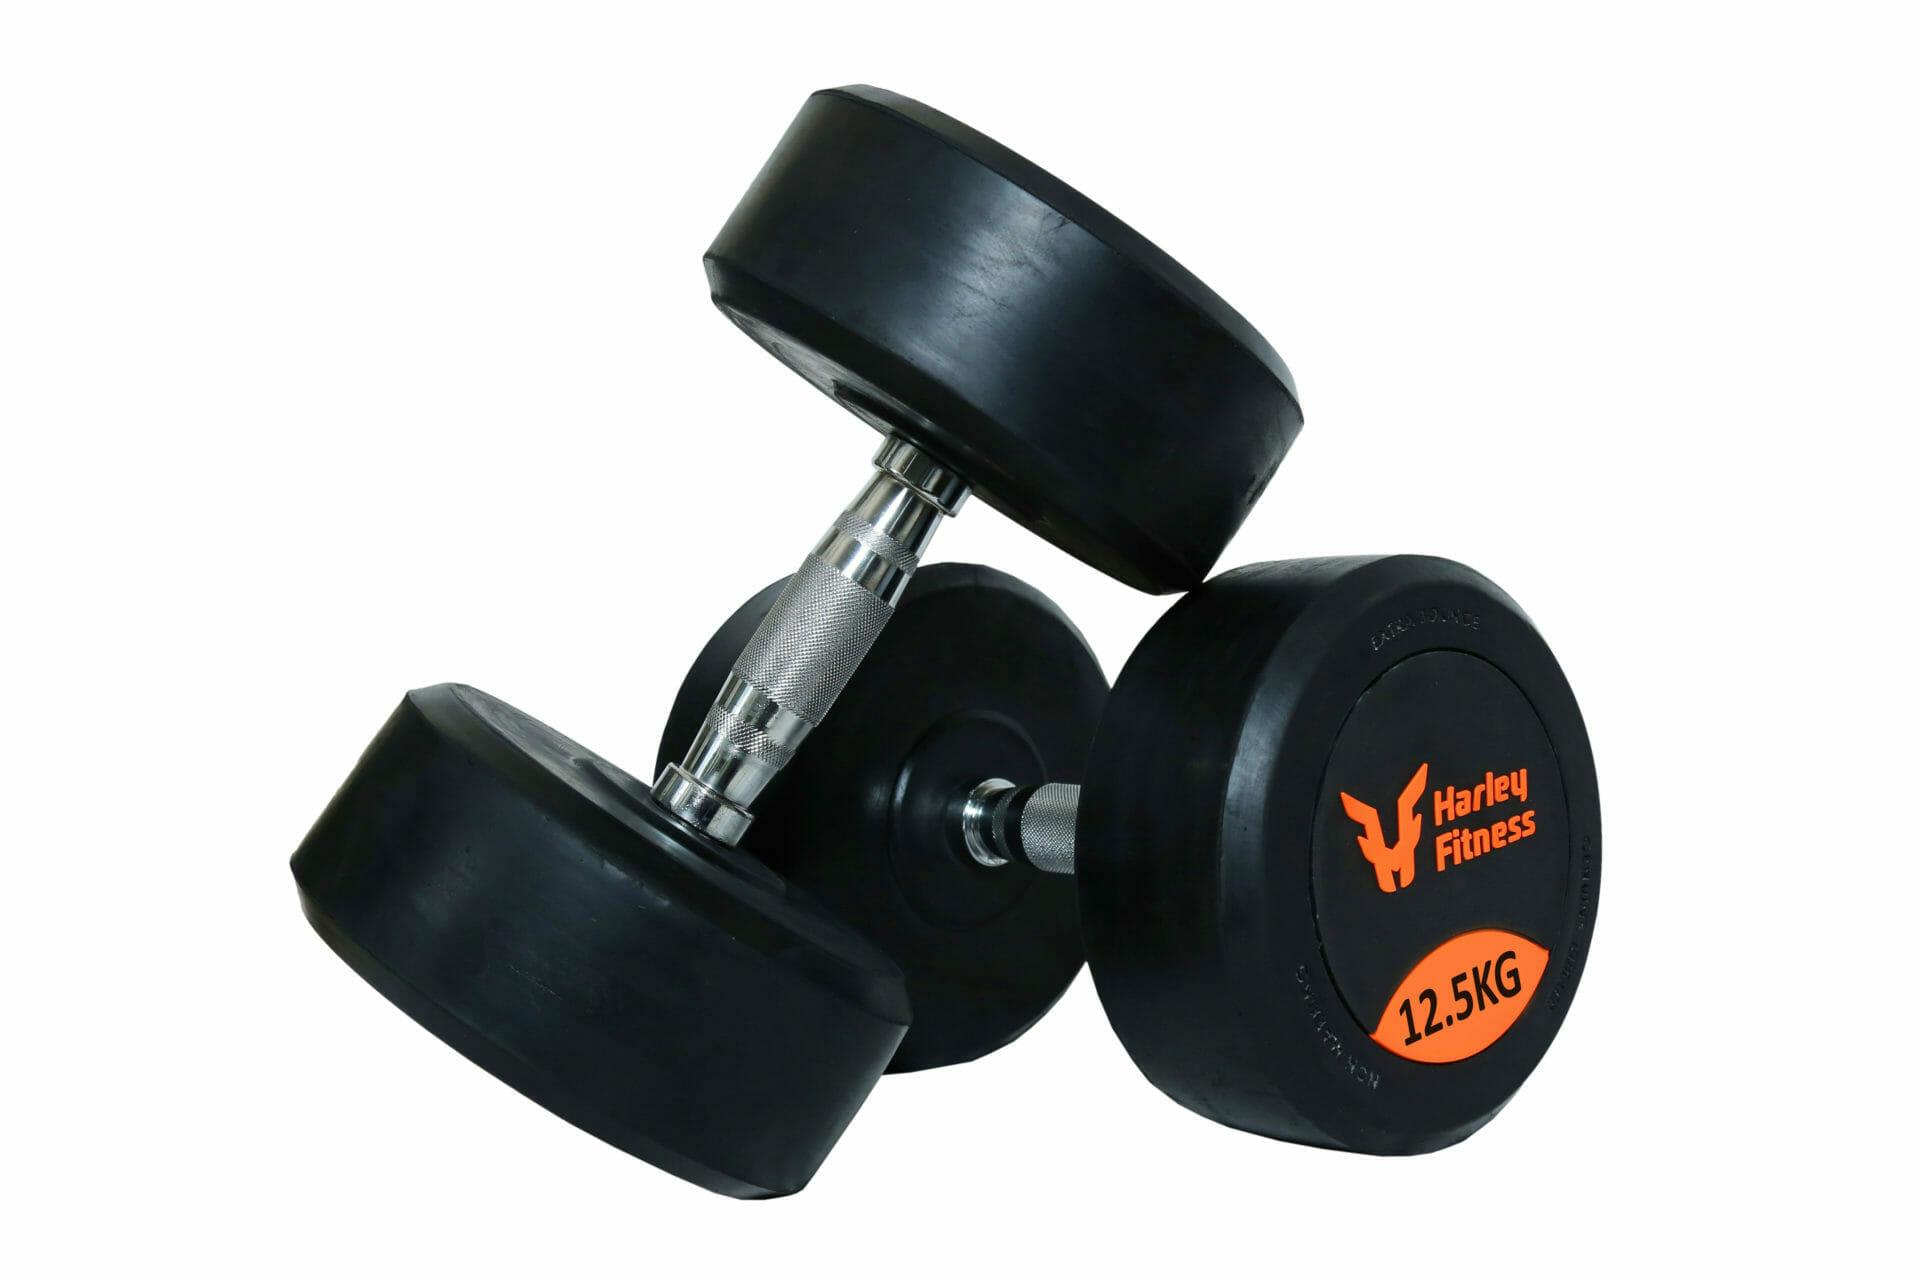 Harley Fitness 12.50 kg Premium Rubber Coated Bouncing Round Dumbbells 1 Pair